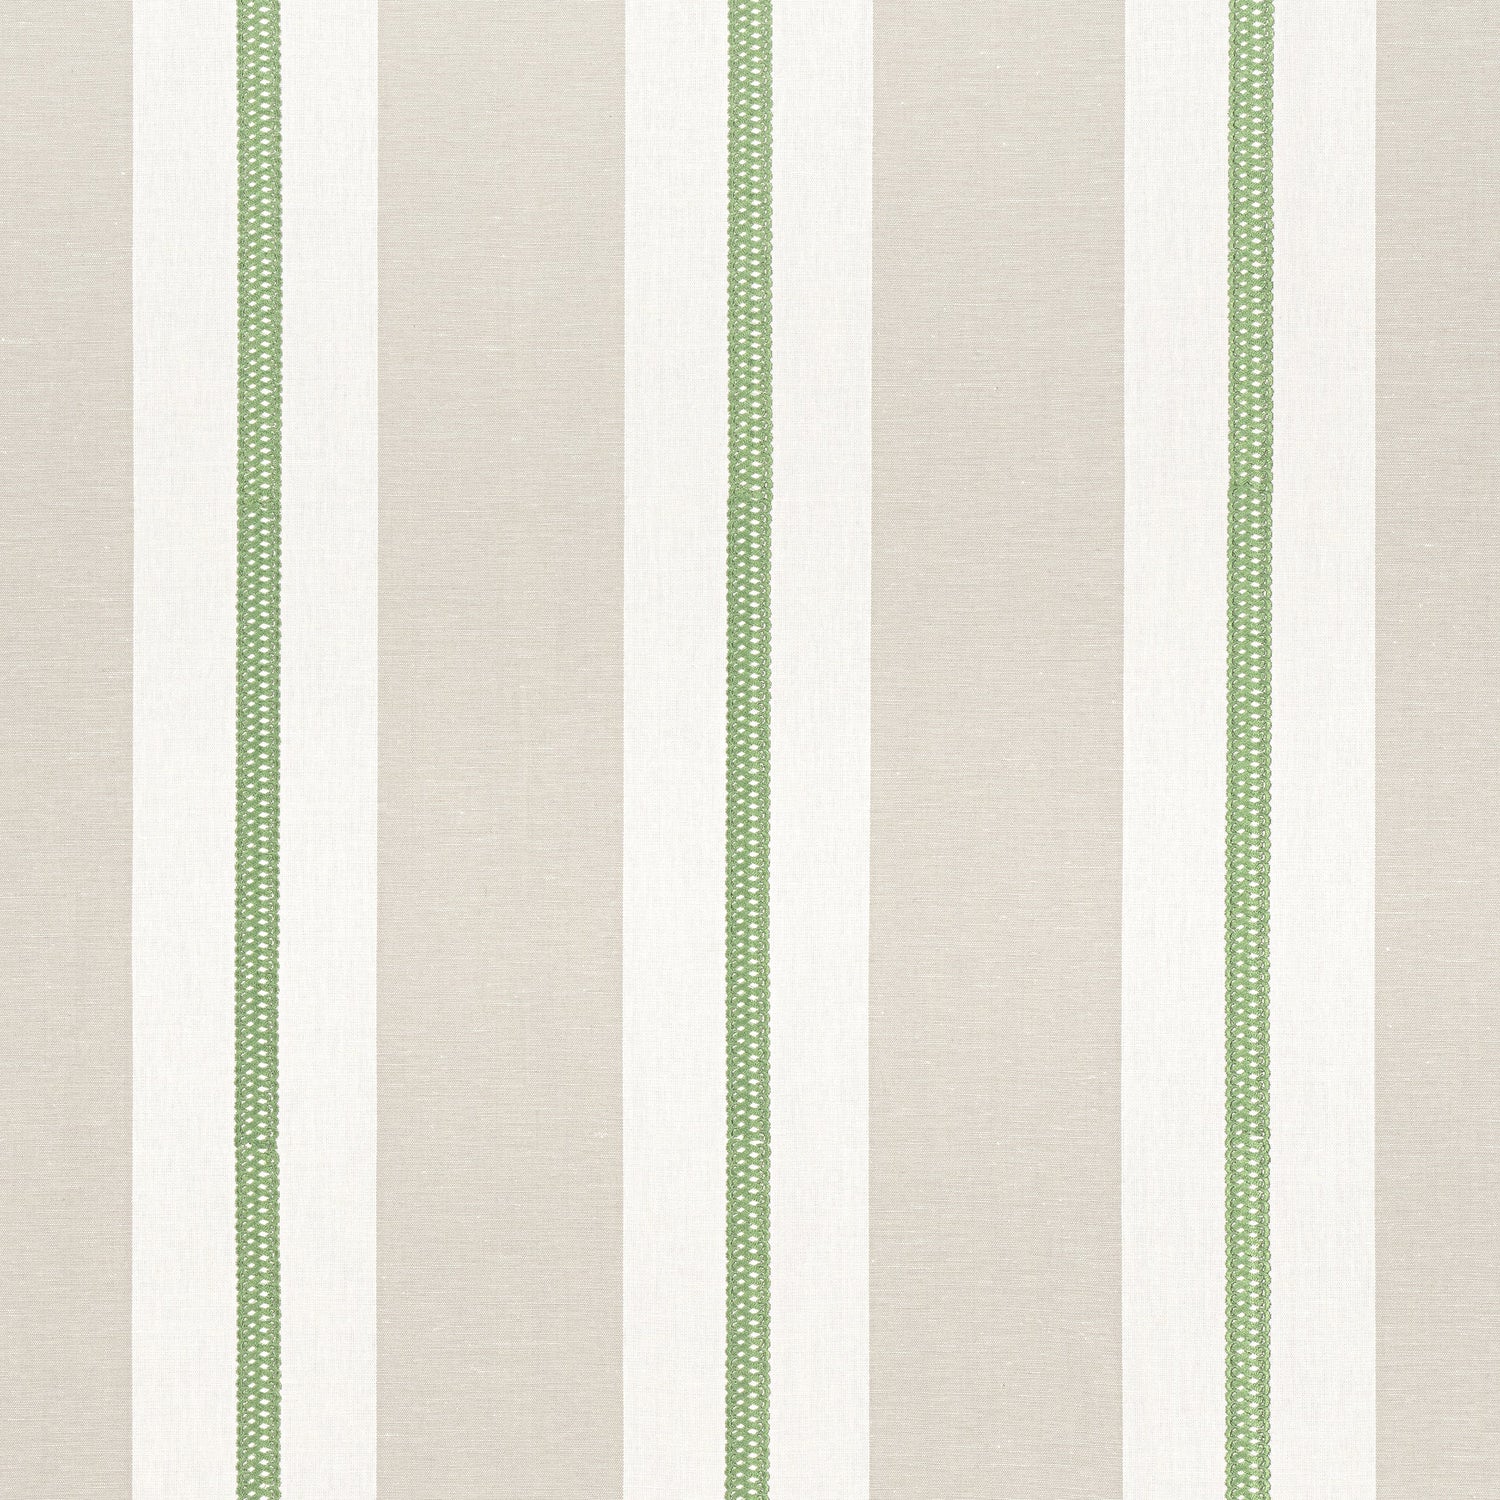 Alden Stripe Embroidery fabric in Kelly color - pattern number AW24530 - by Anna French in the Devon collection